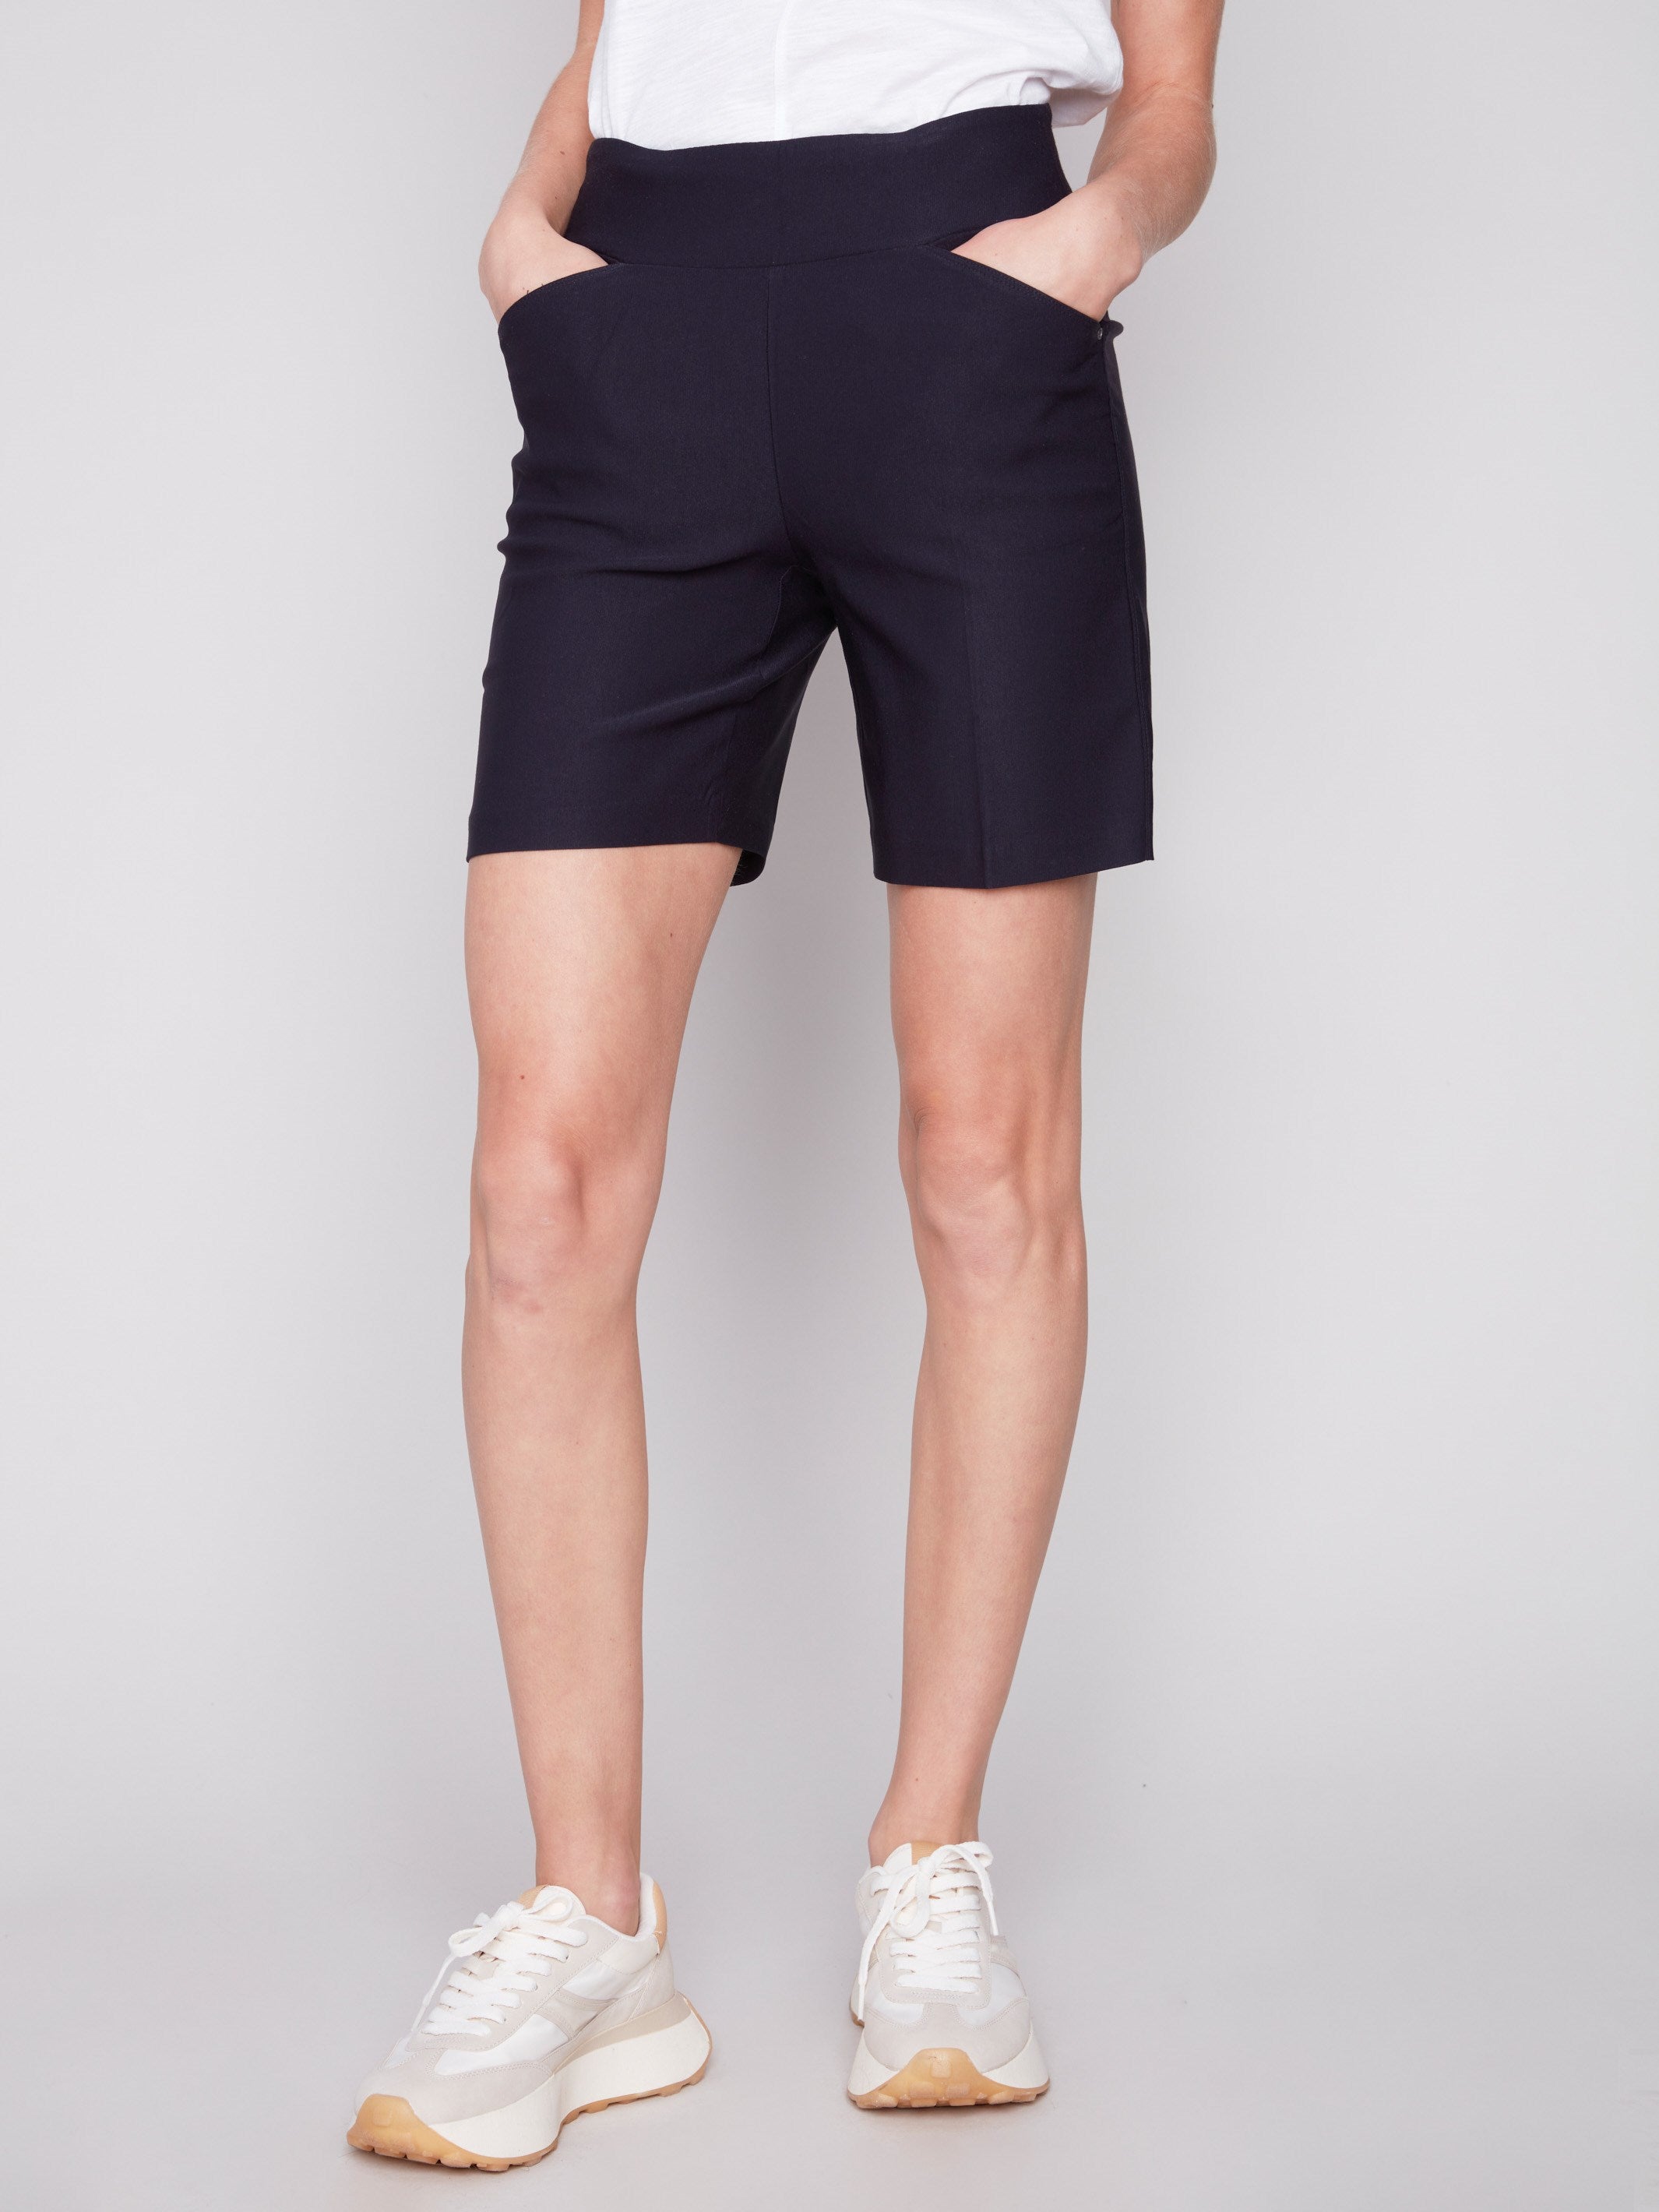 Smooth Stretch Shorts - Navy - Charlie B Collection Canada - Image 3